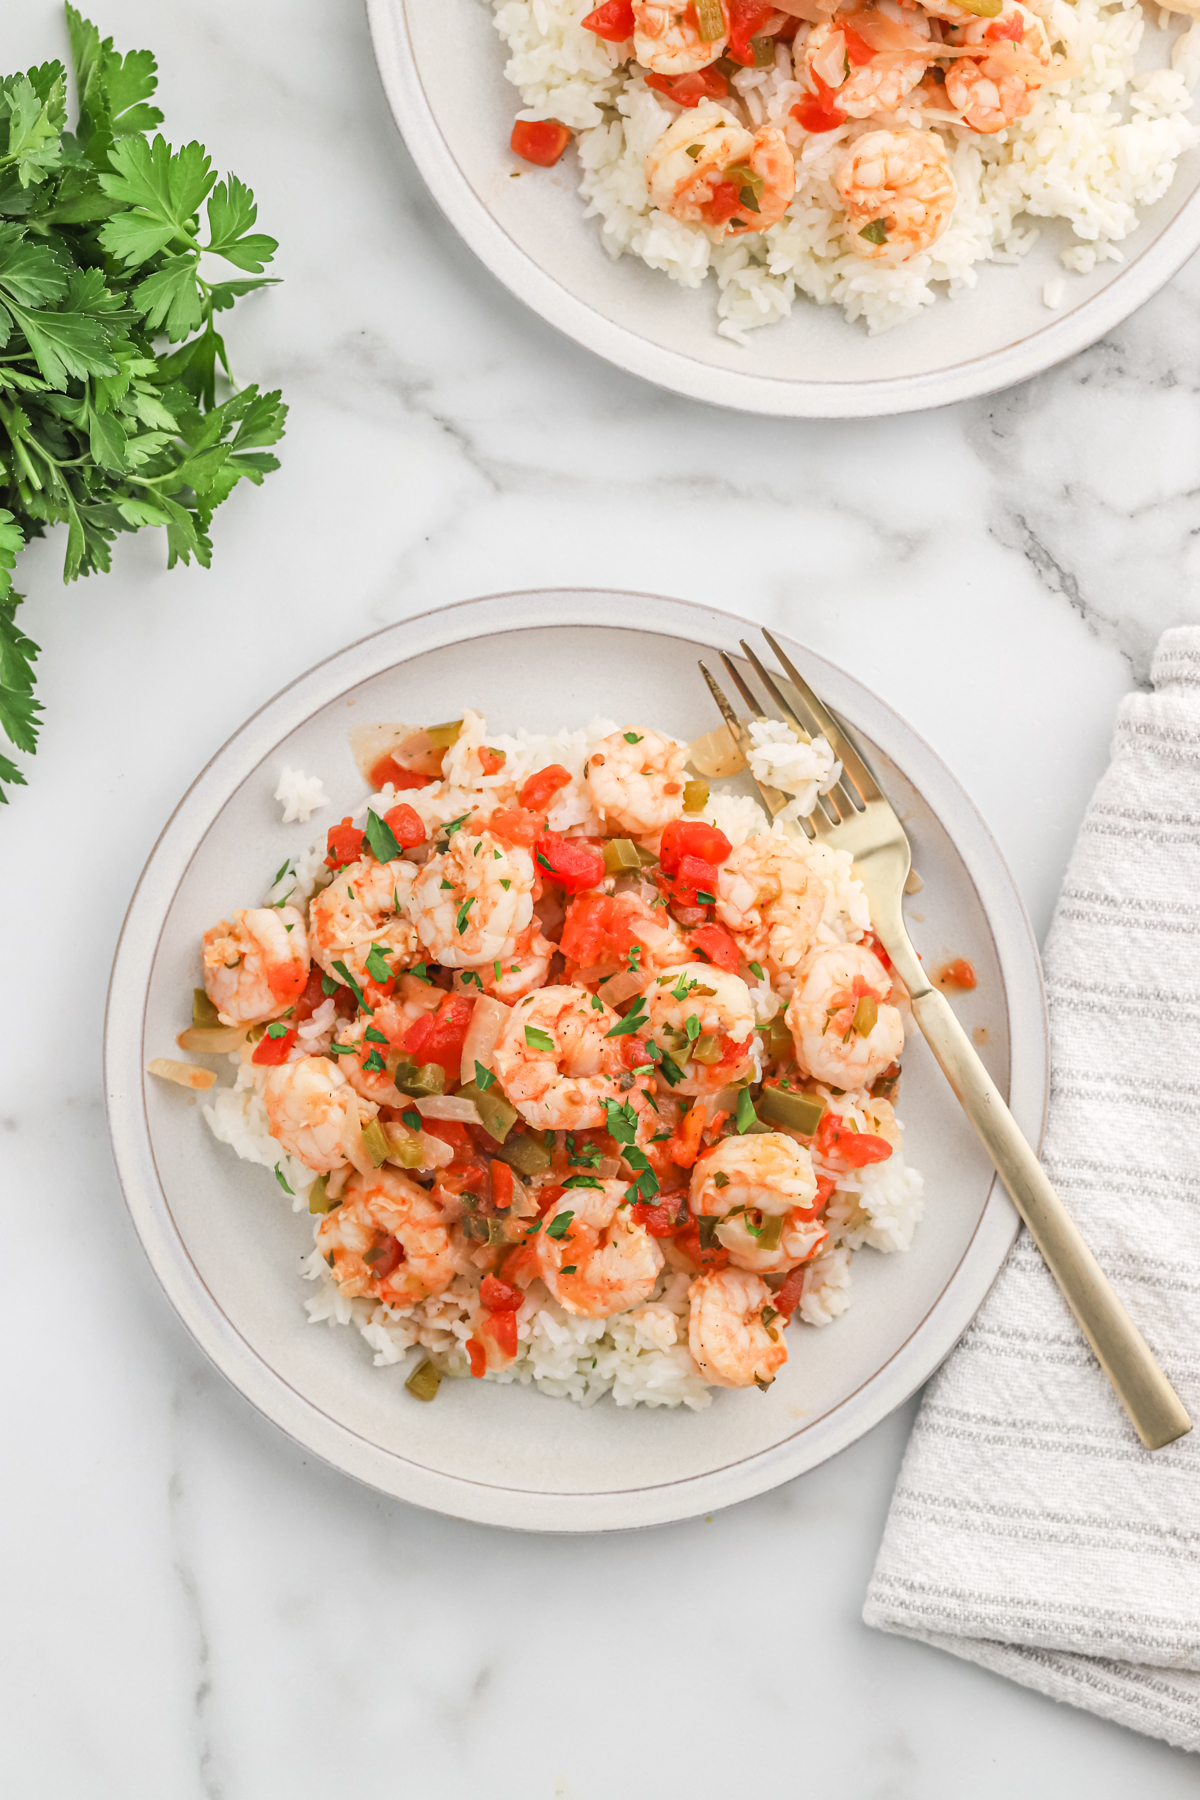 Shrimp creole served over white rice